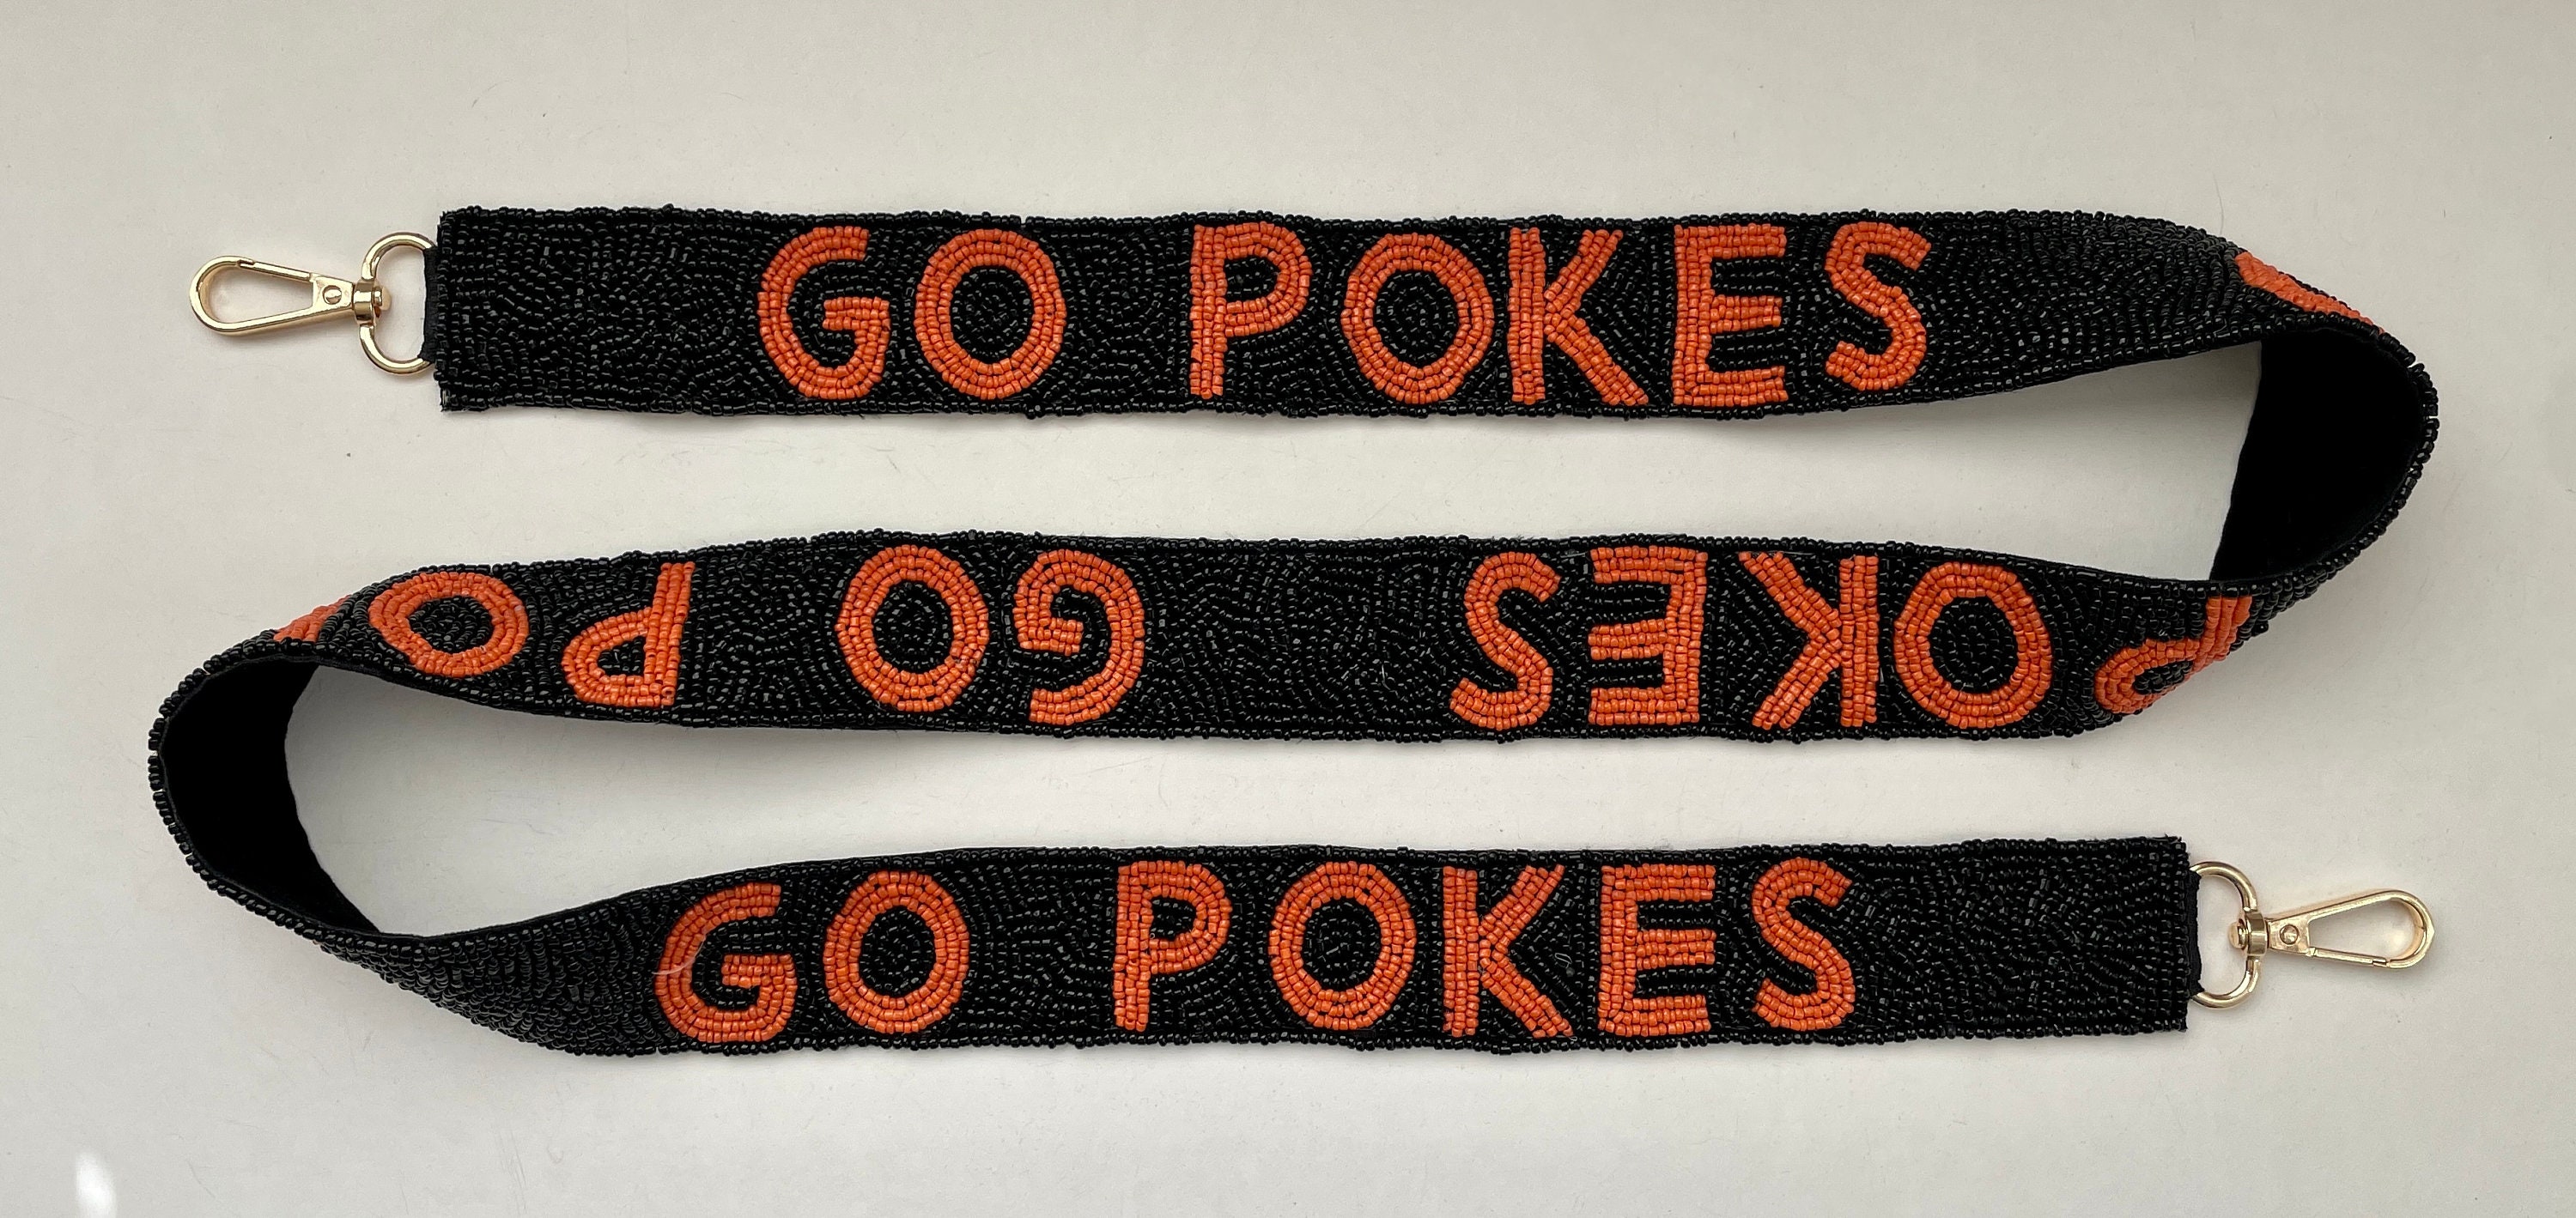 Oklahoma State Go Pokes Orange and Black Beaded Purse Strap by Desden-  Officially Collegiate Licensed